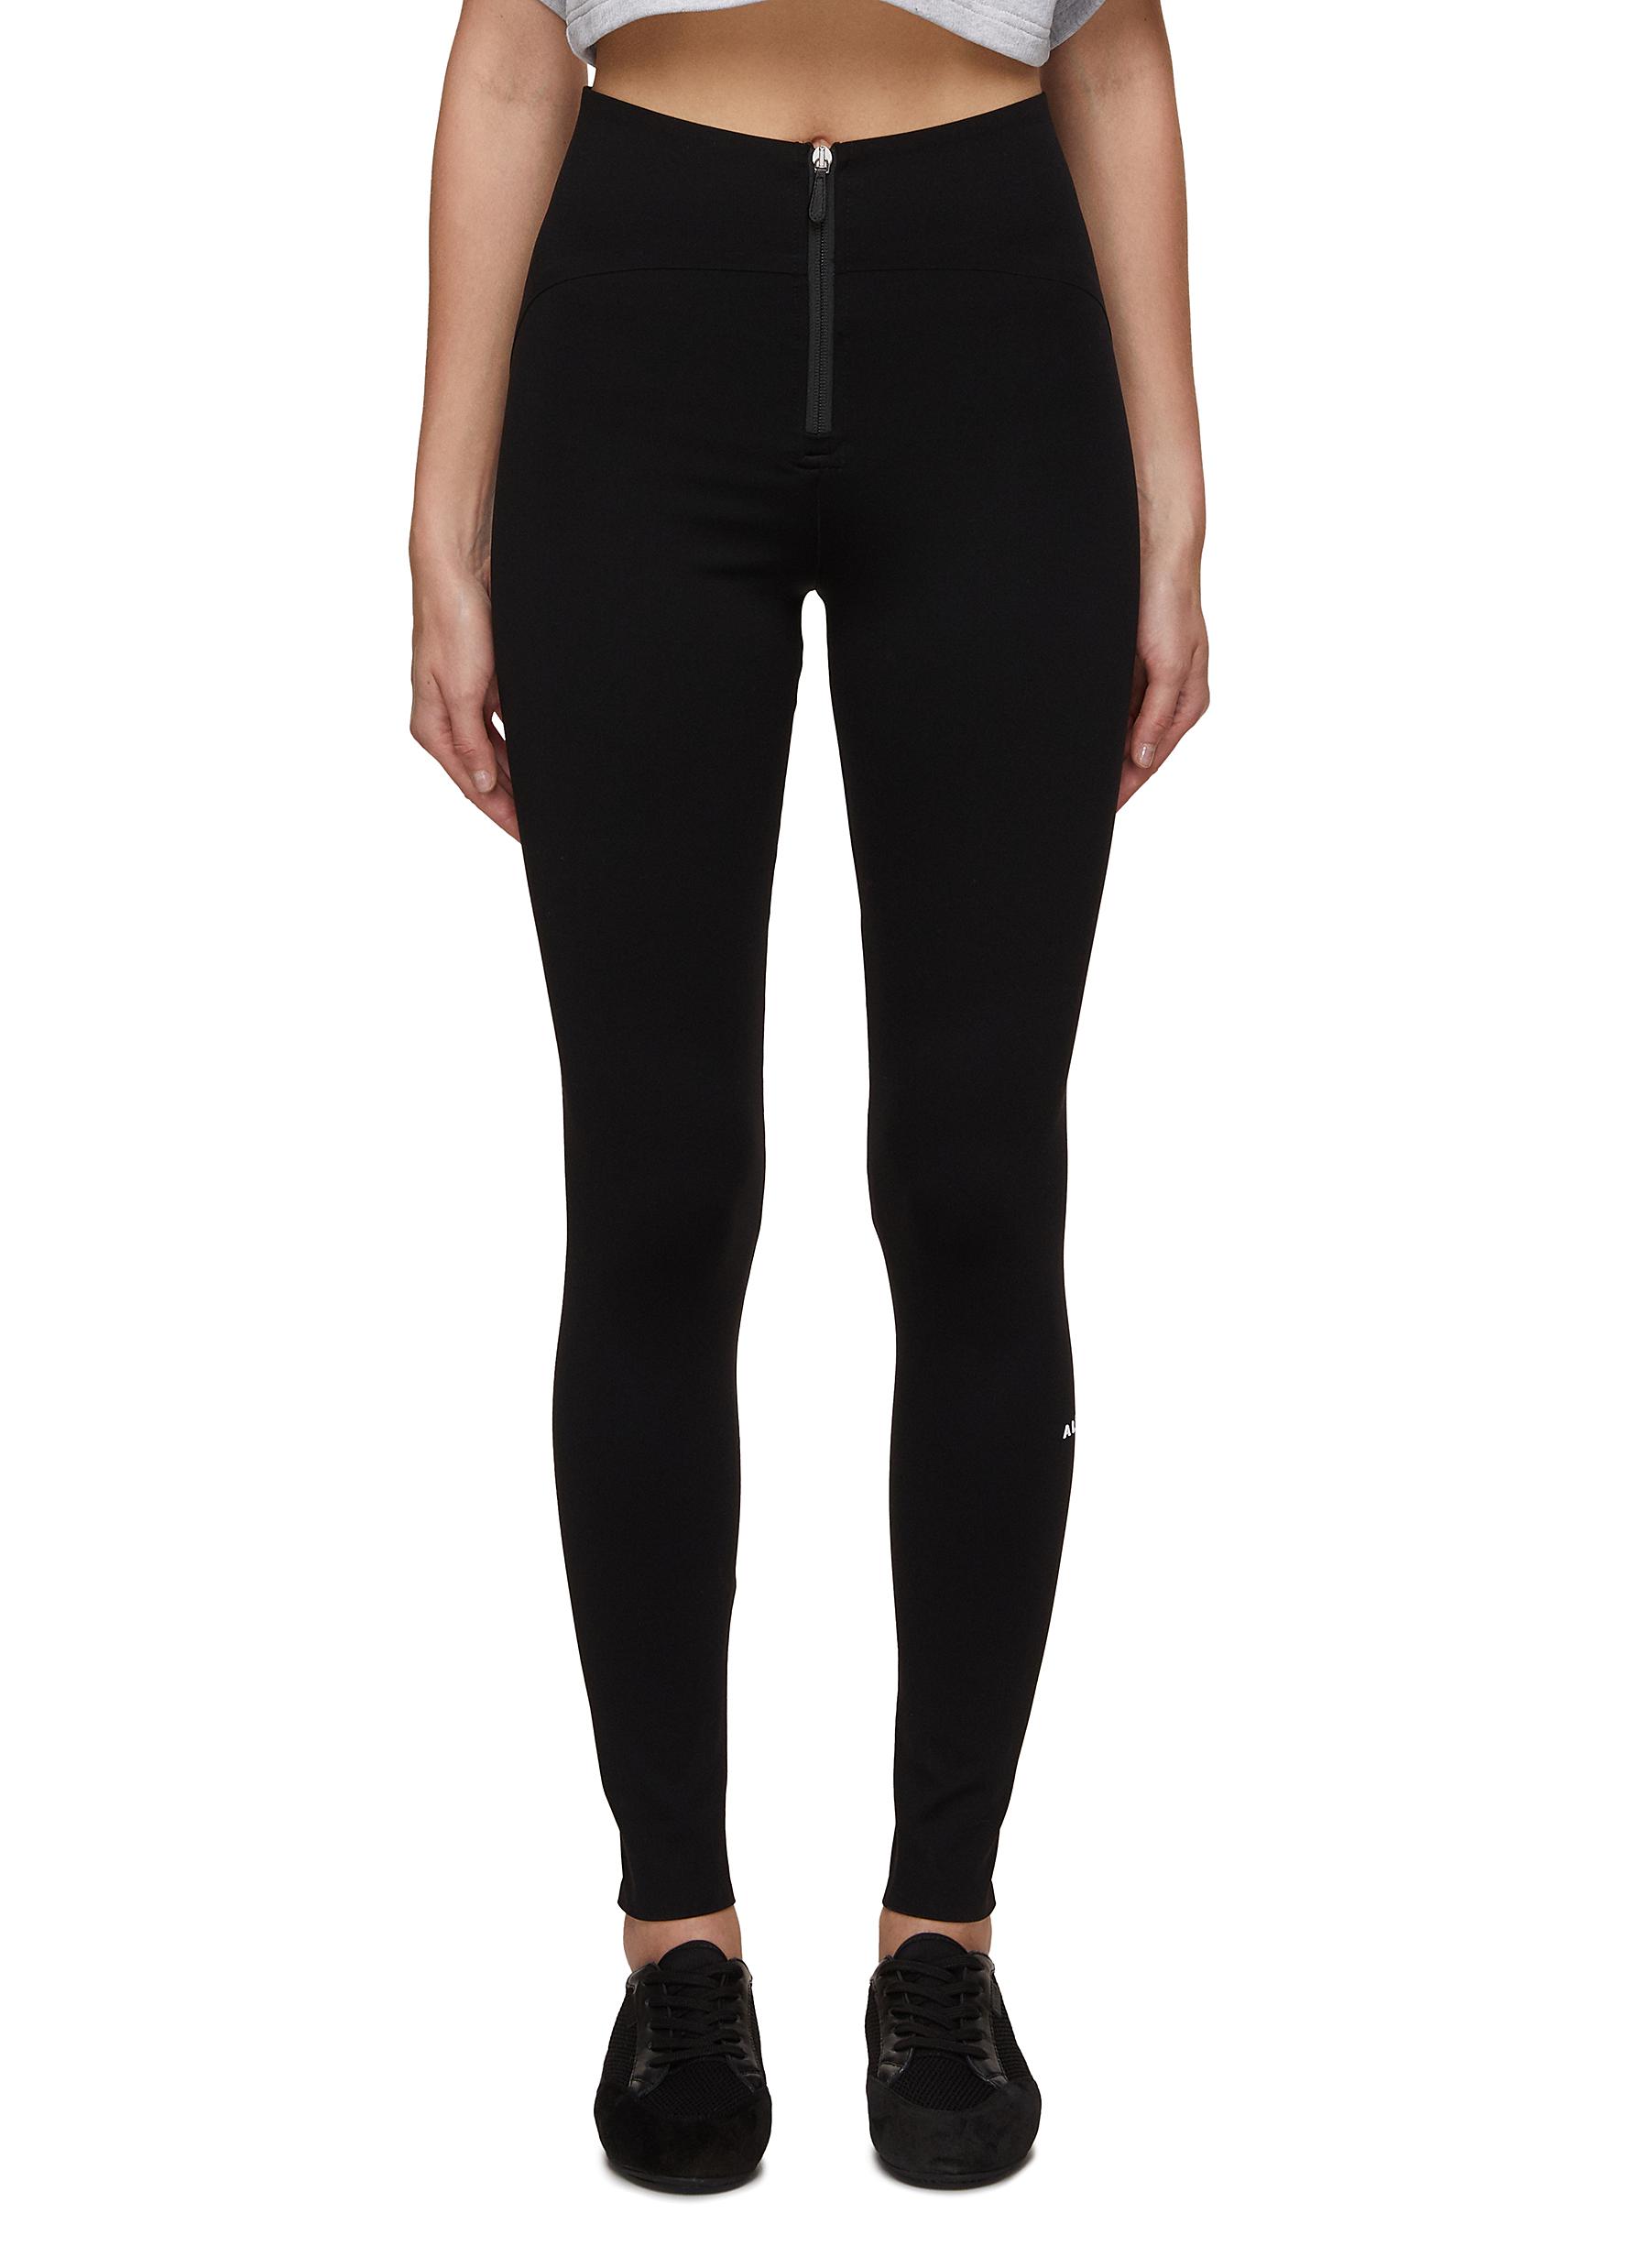 Call It Out High Rise Ampersand Avenue Black Leggings - 3 options!, Avery  Mae Boutique